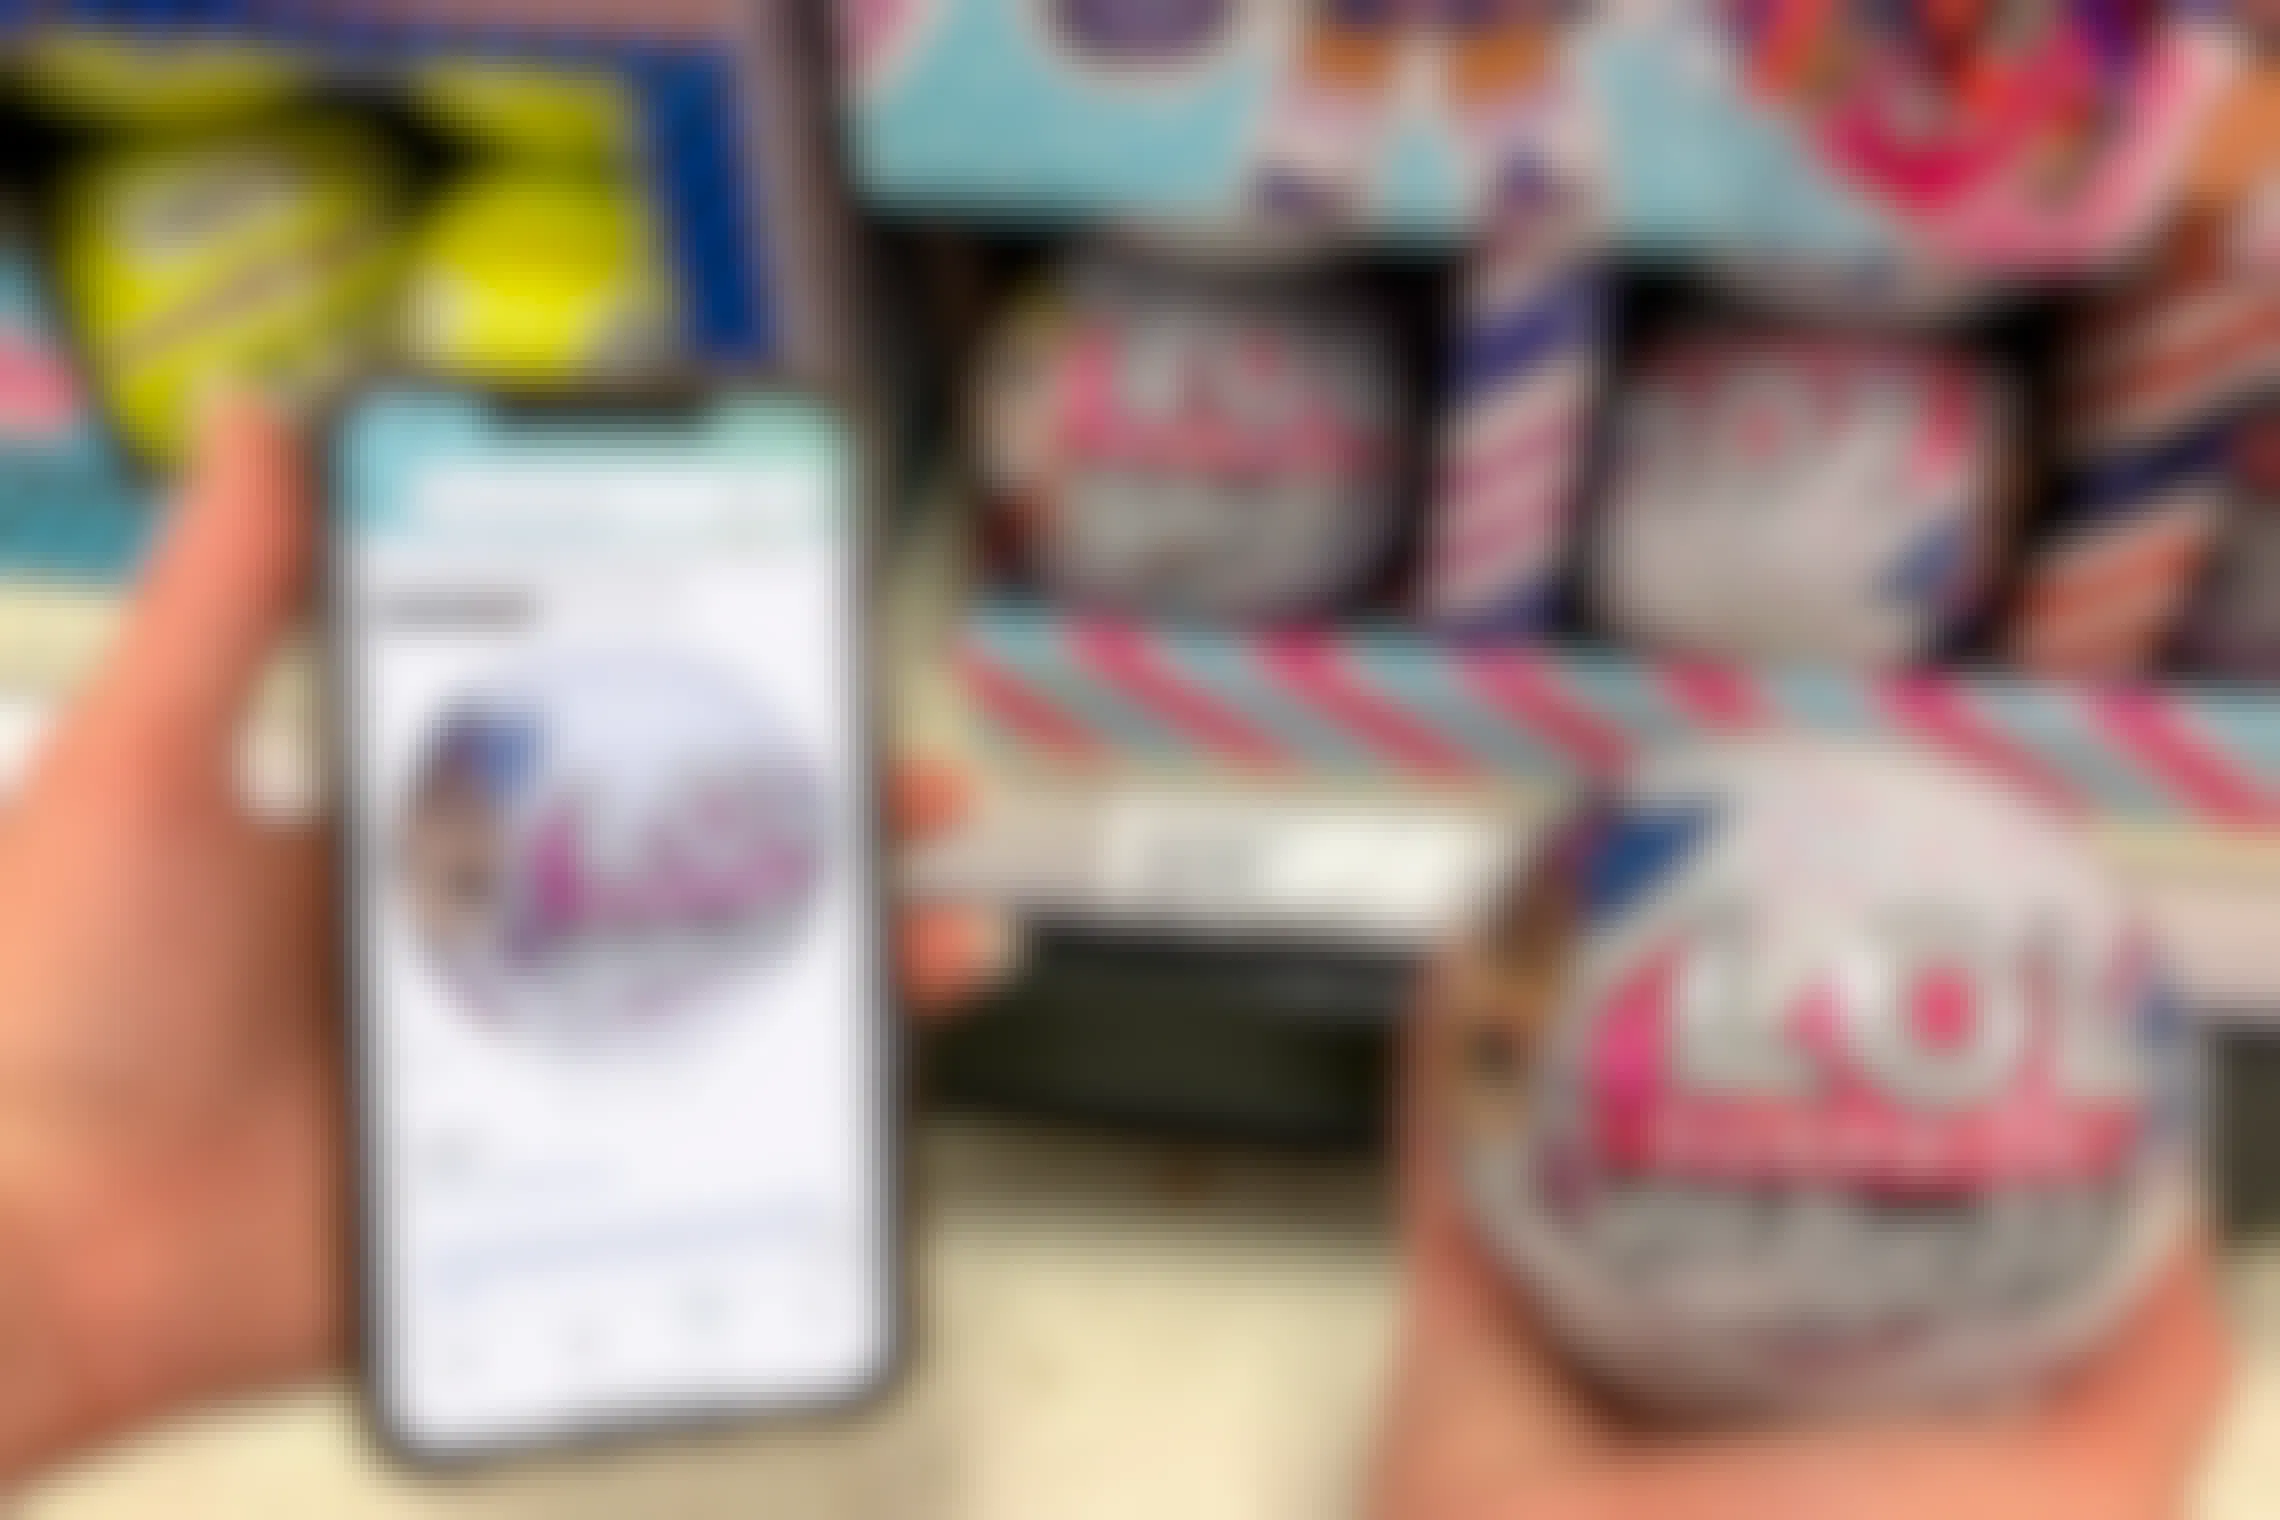 Woman holding up an LOL Surprise all star ball in target doing a price check on her phone using amazon